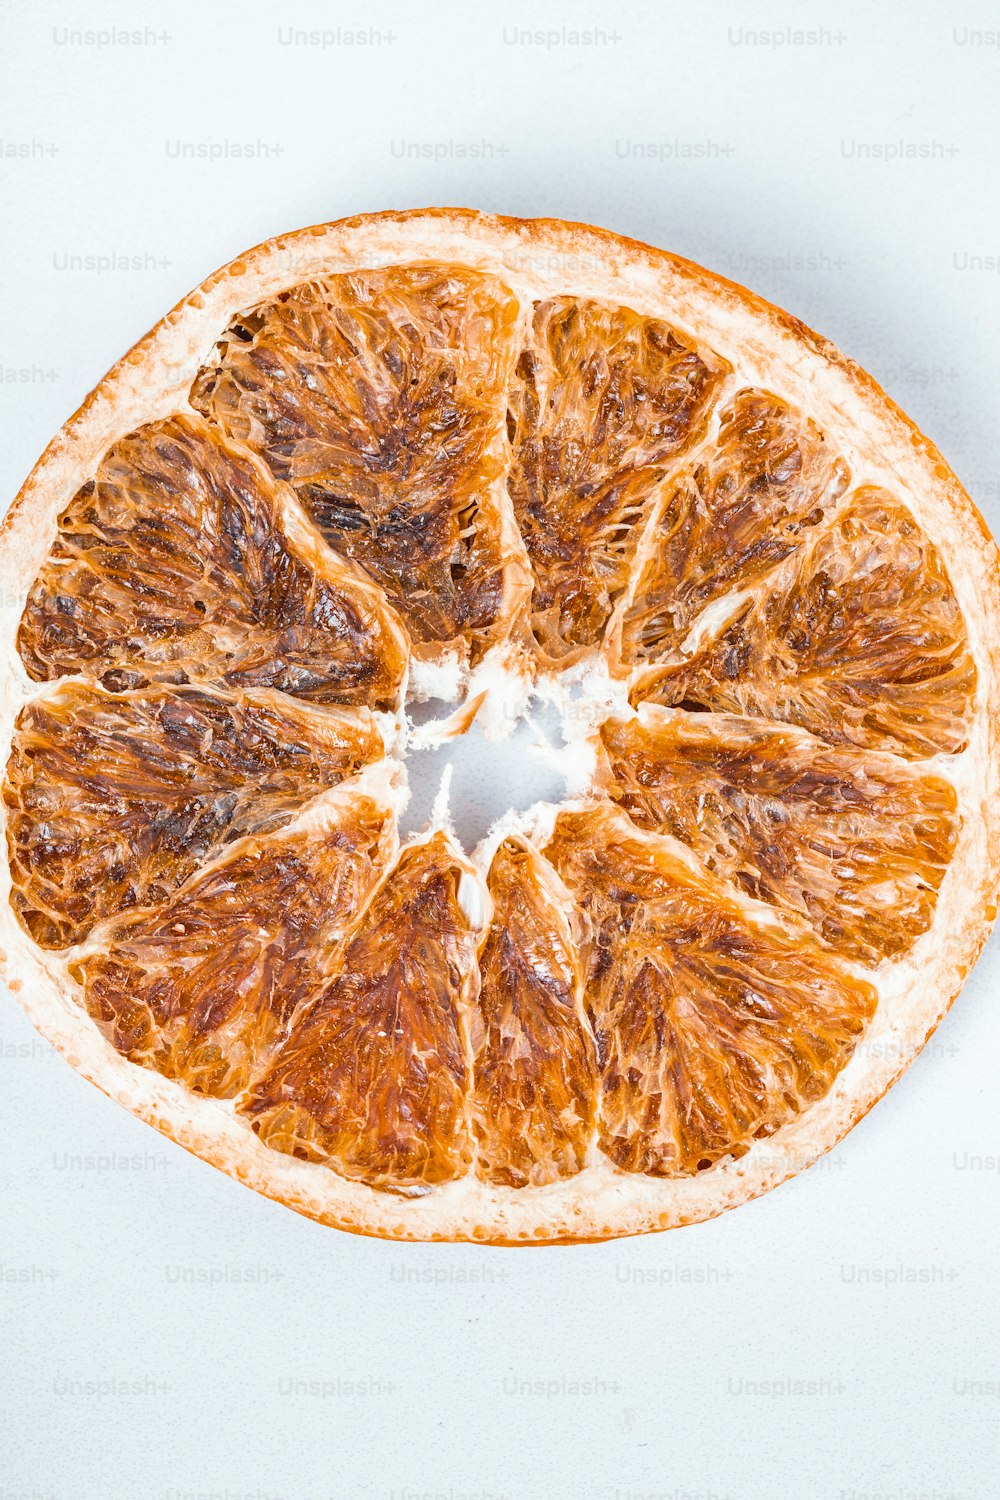 an orange cut in half on a white surface